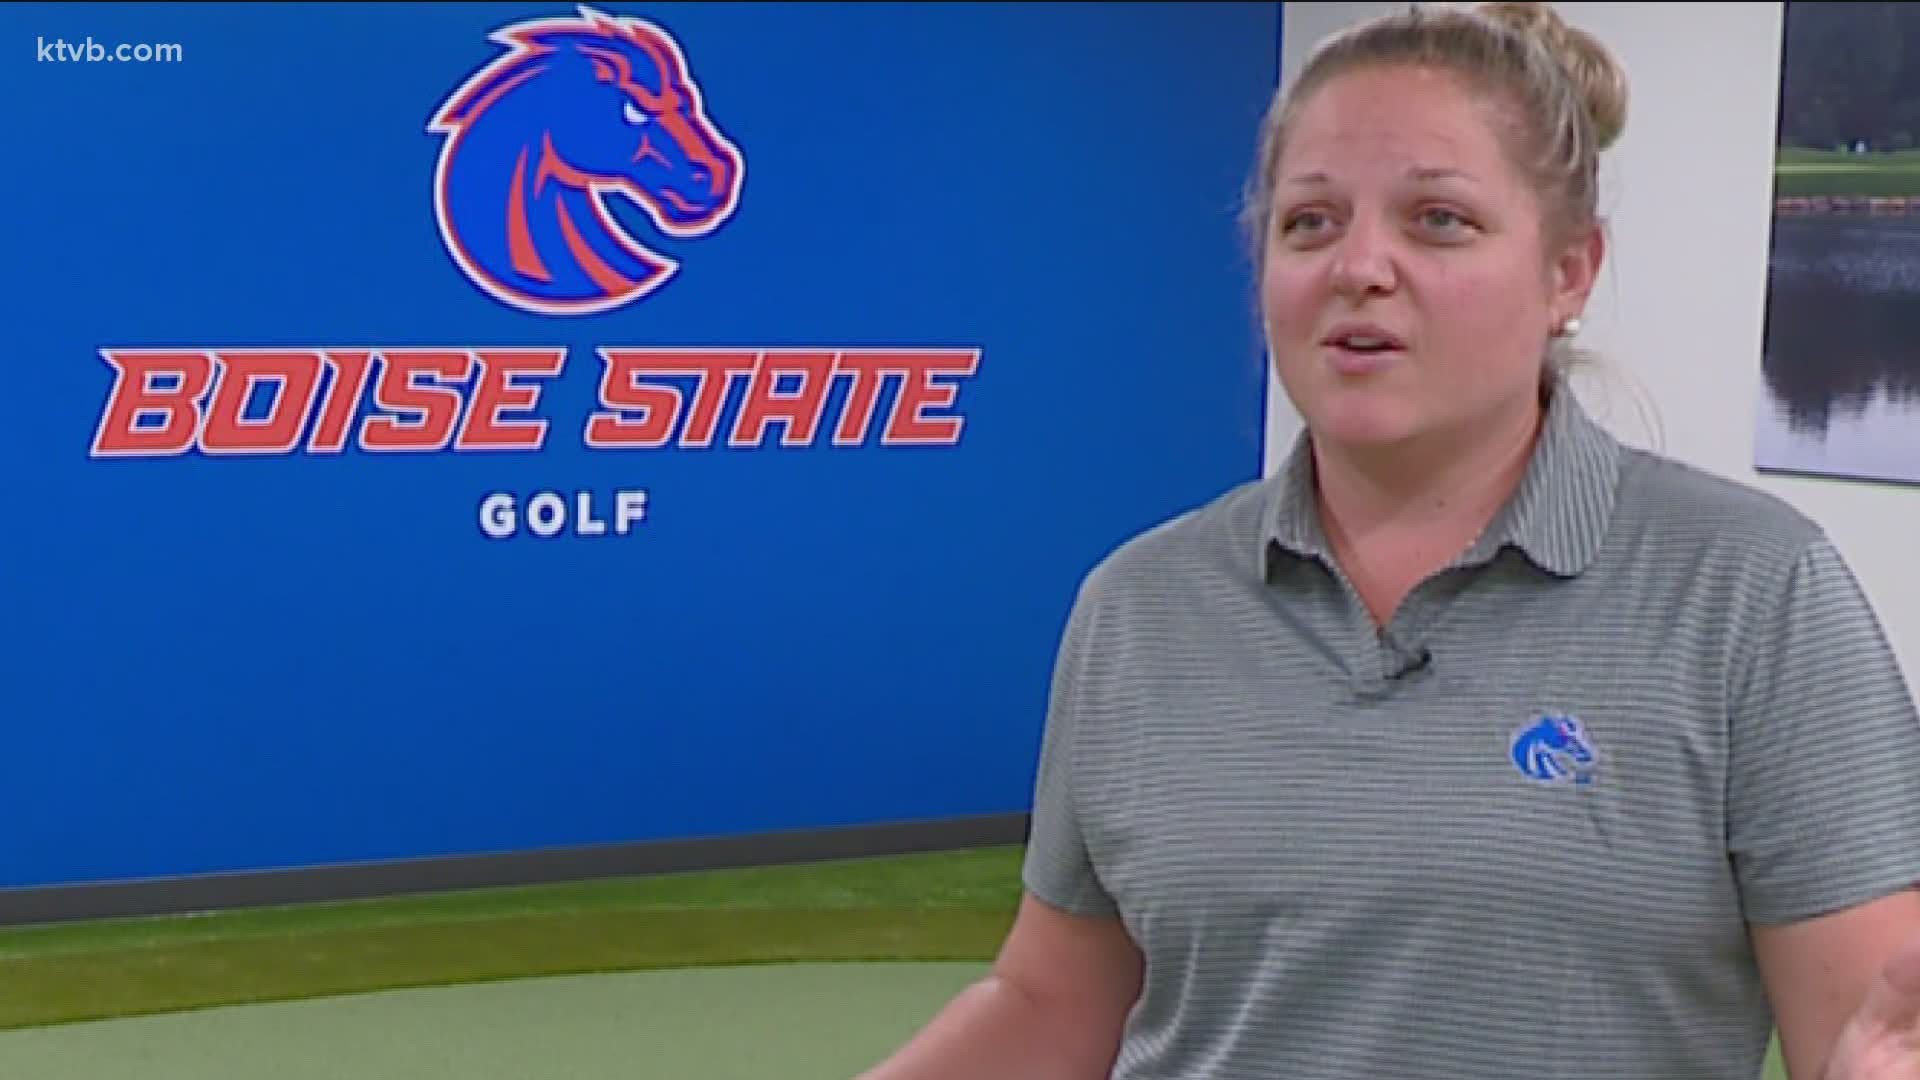 Kailin Downs arrived in Boise after spending the last eight seasons as a head golf coach at Portland State University.